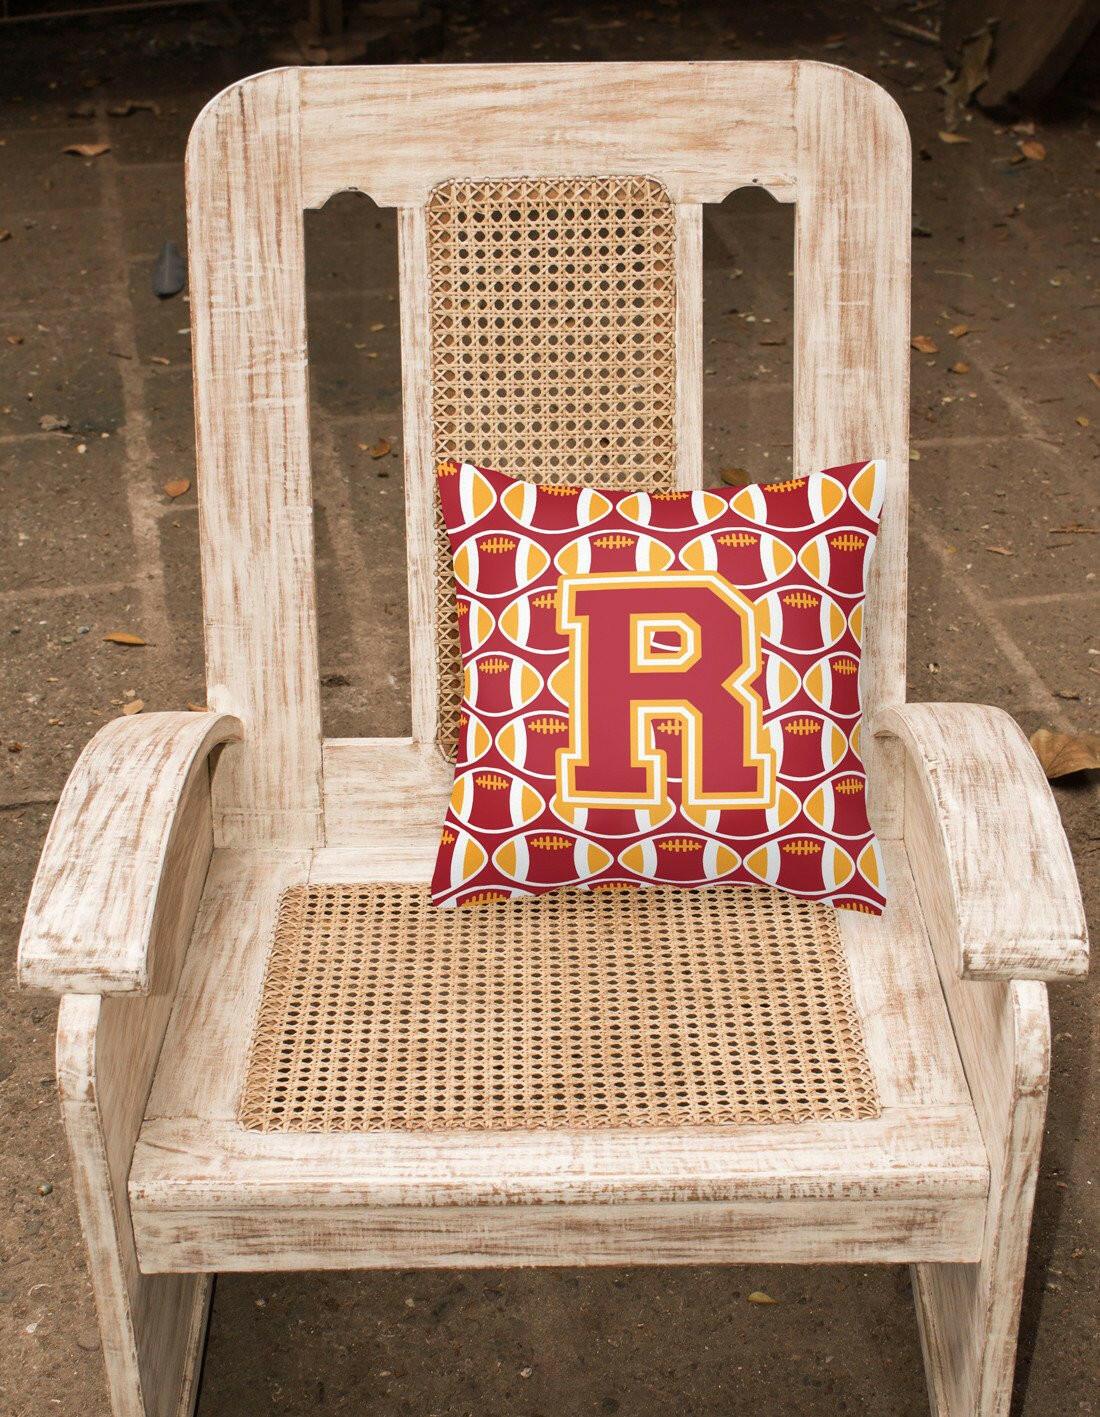 Letter R Football Cardinal and Gold Fabric Decorative Pillow CJ1070-RPW1414 by Caroline's Treasures